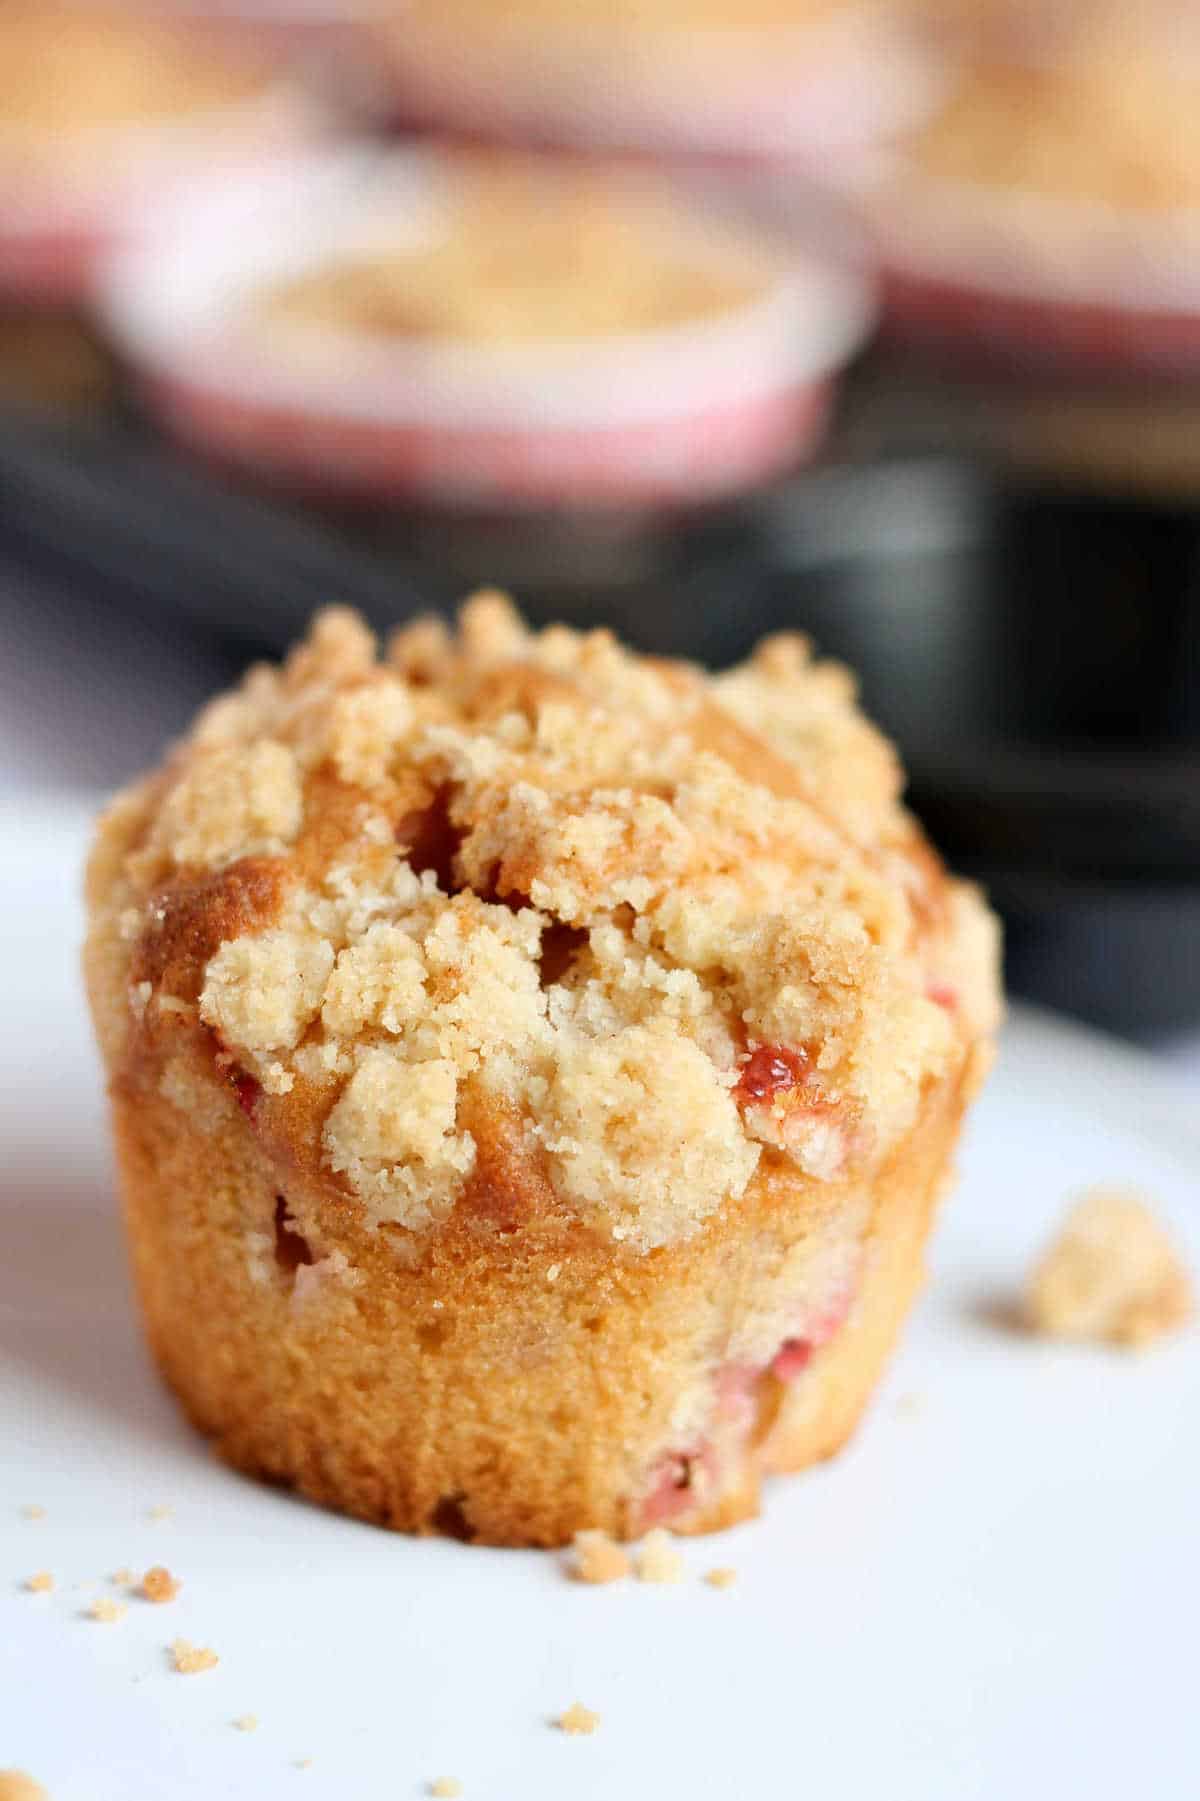 A close up of a muffin with streusel topping.